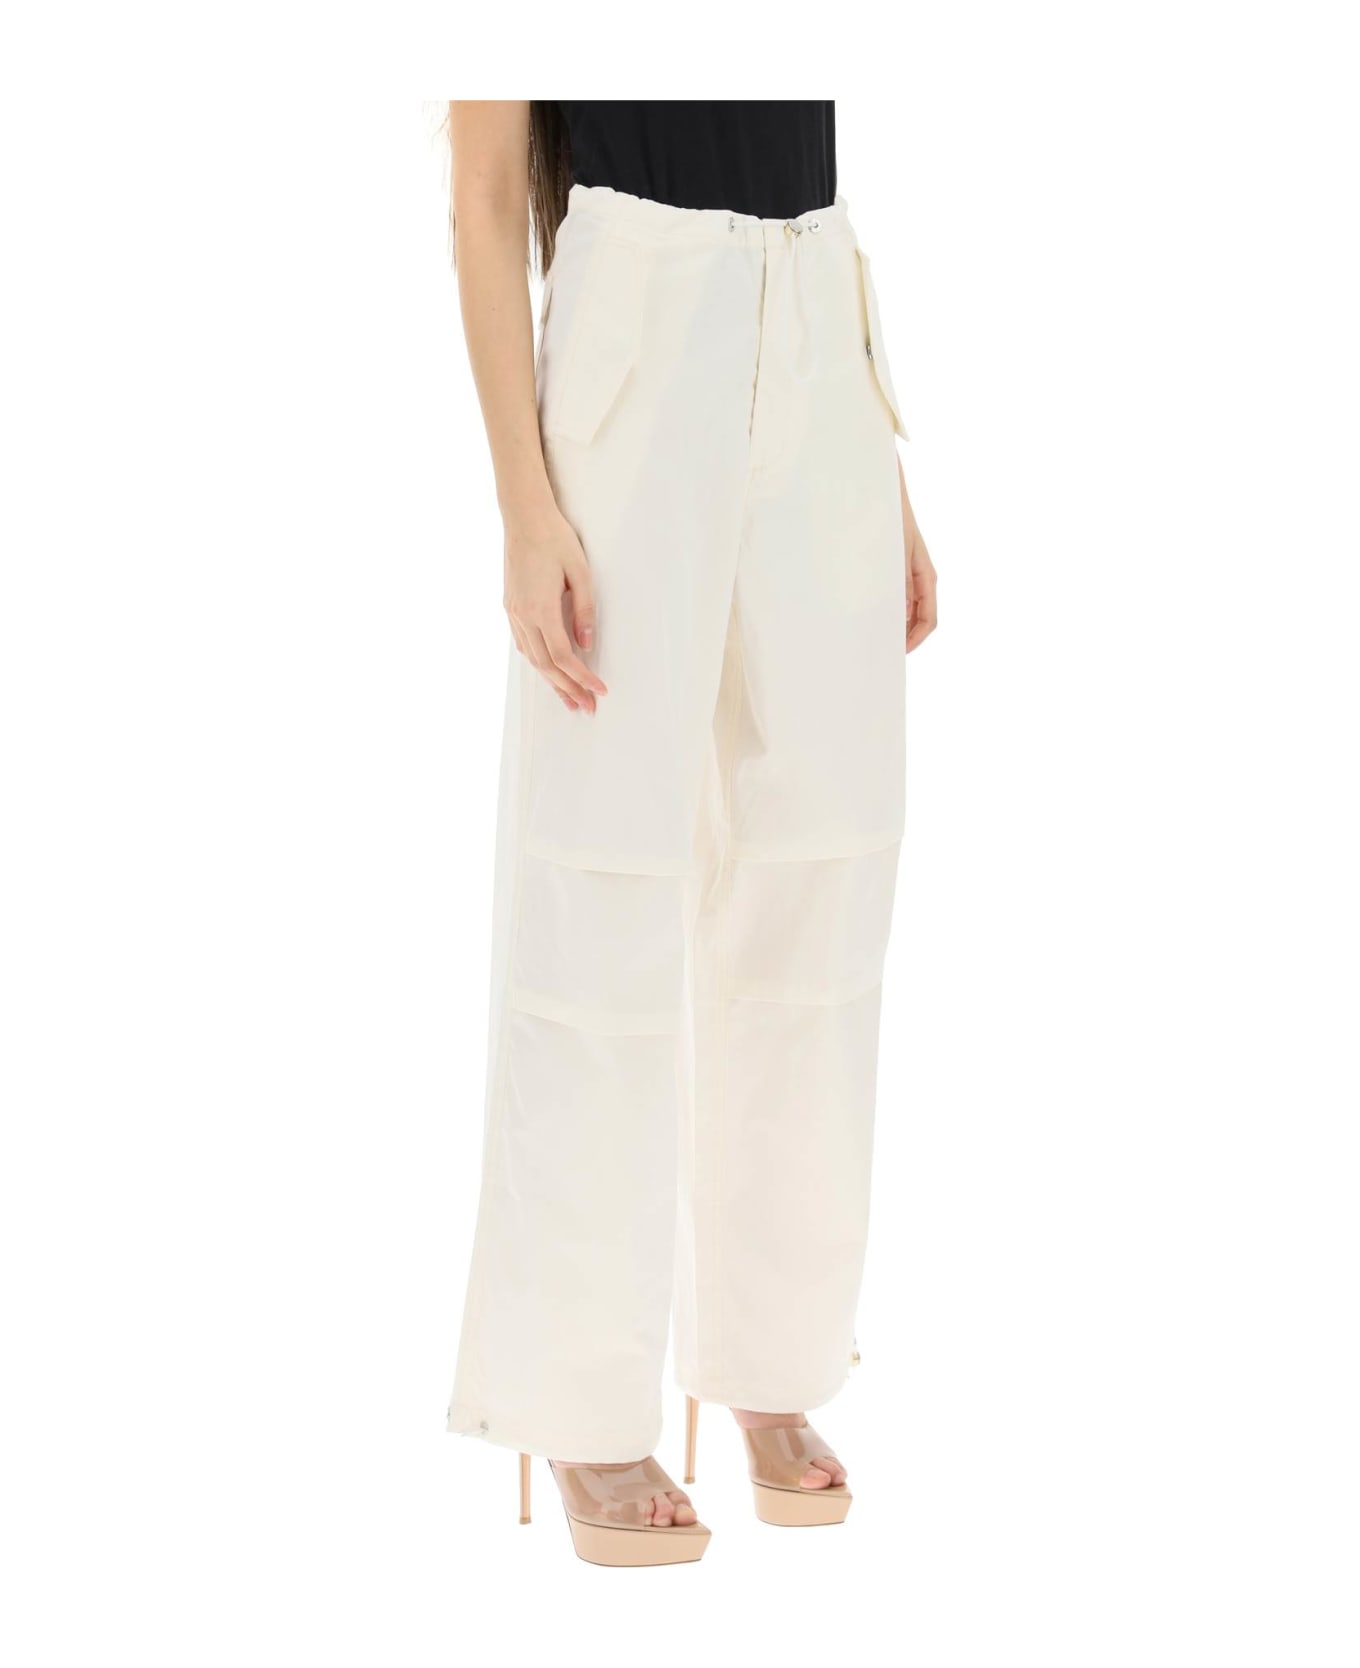 Dion Lee Parachute Pants - IVORY (White) ボトムス